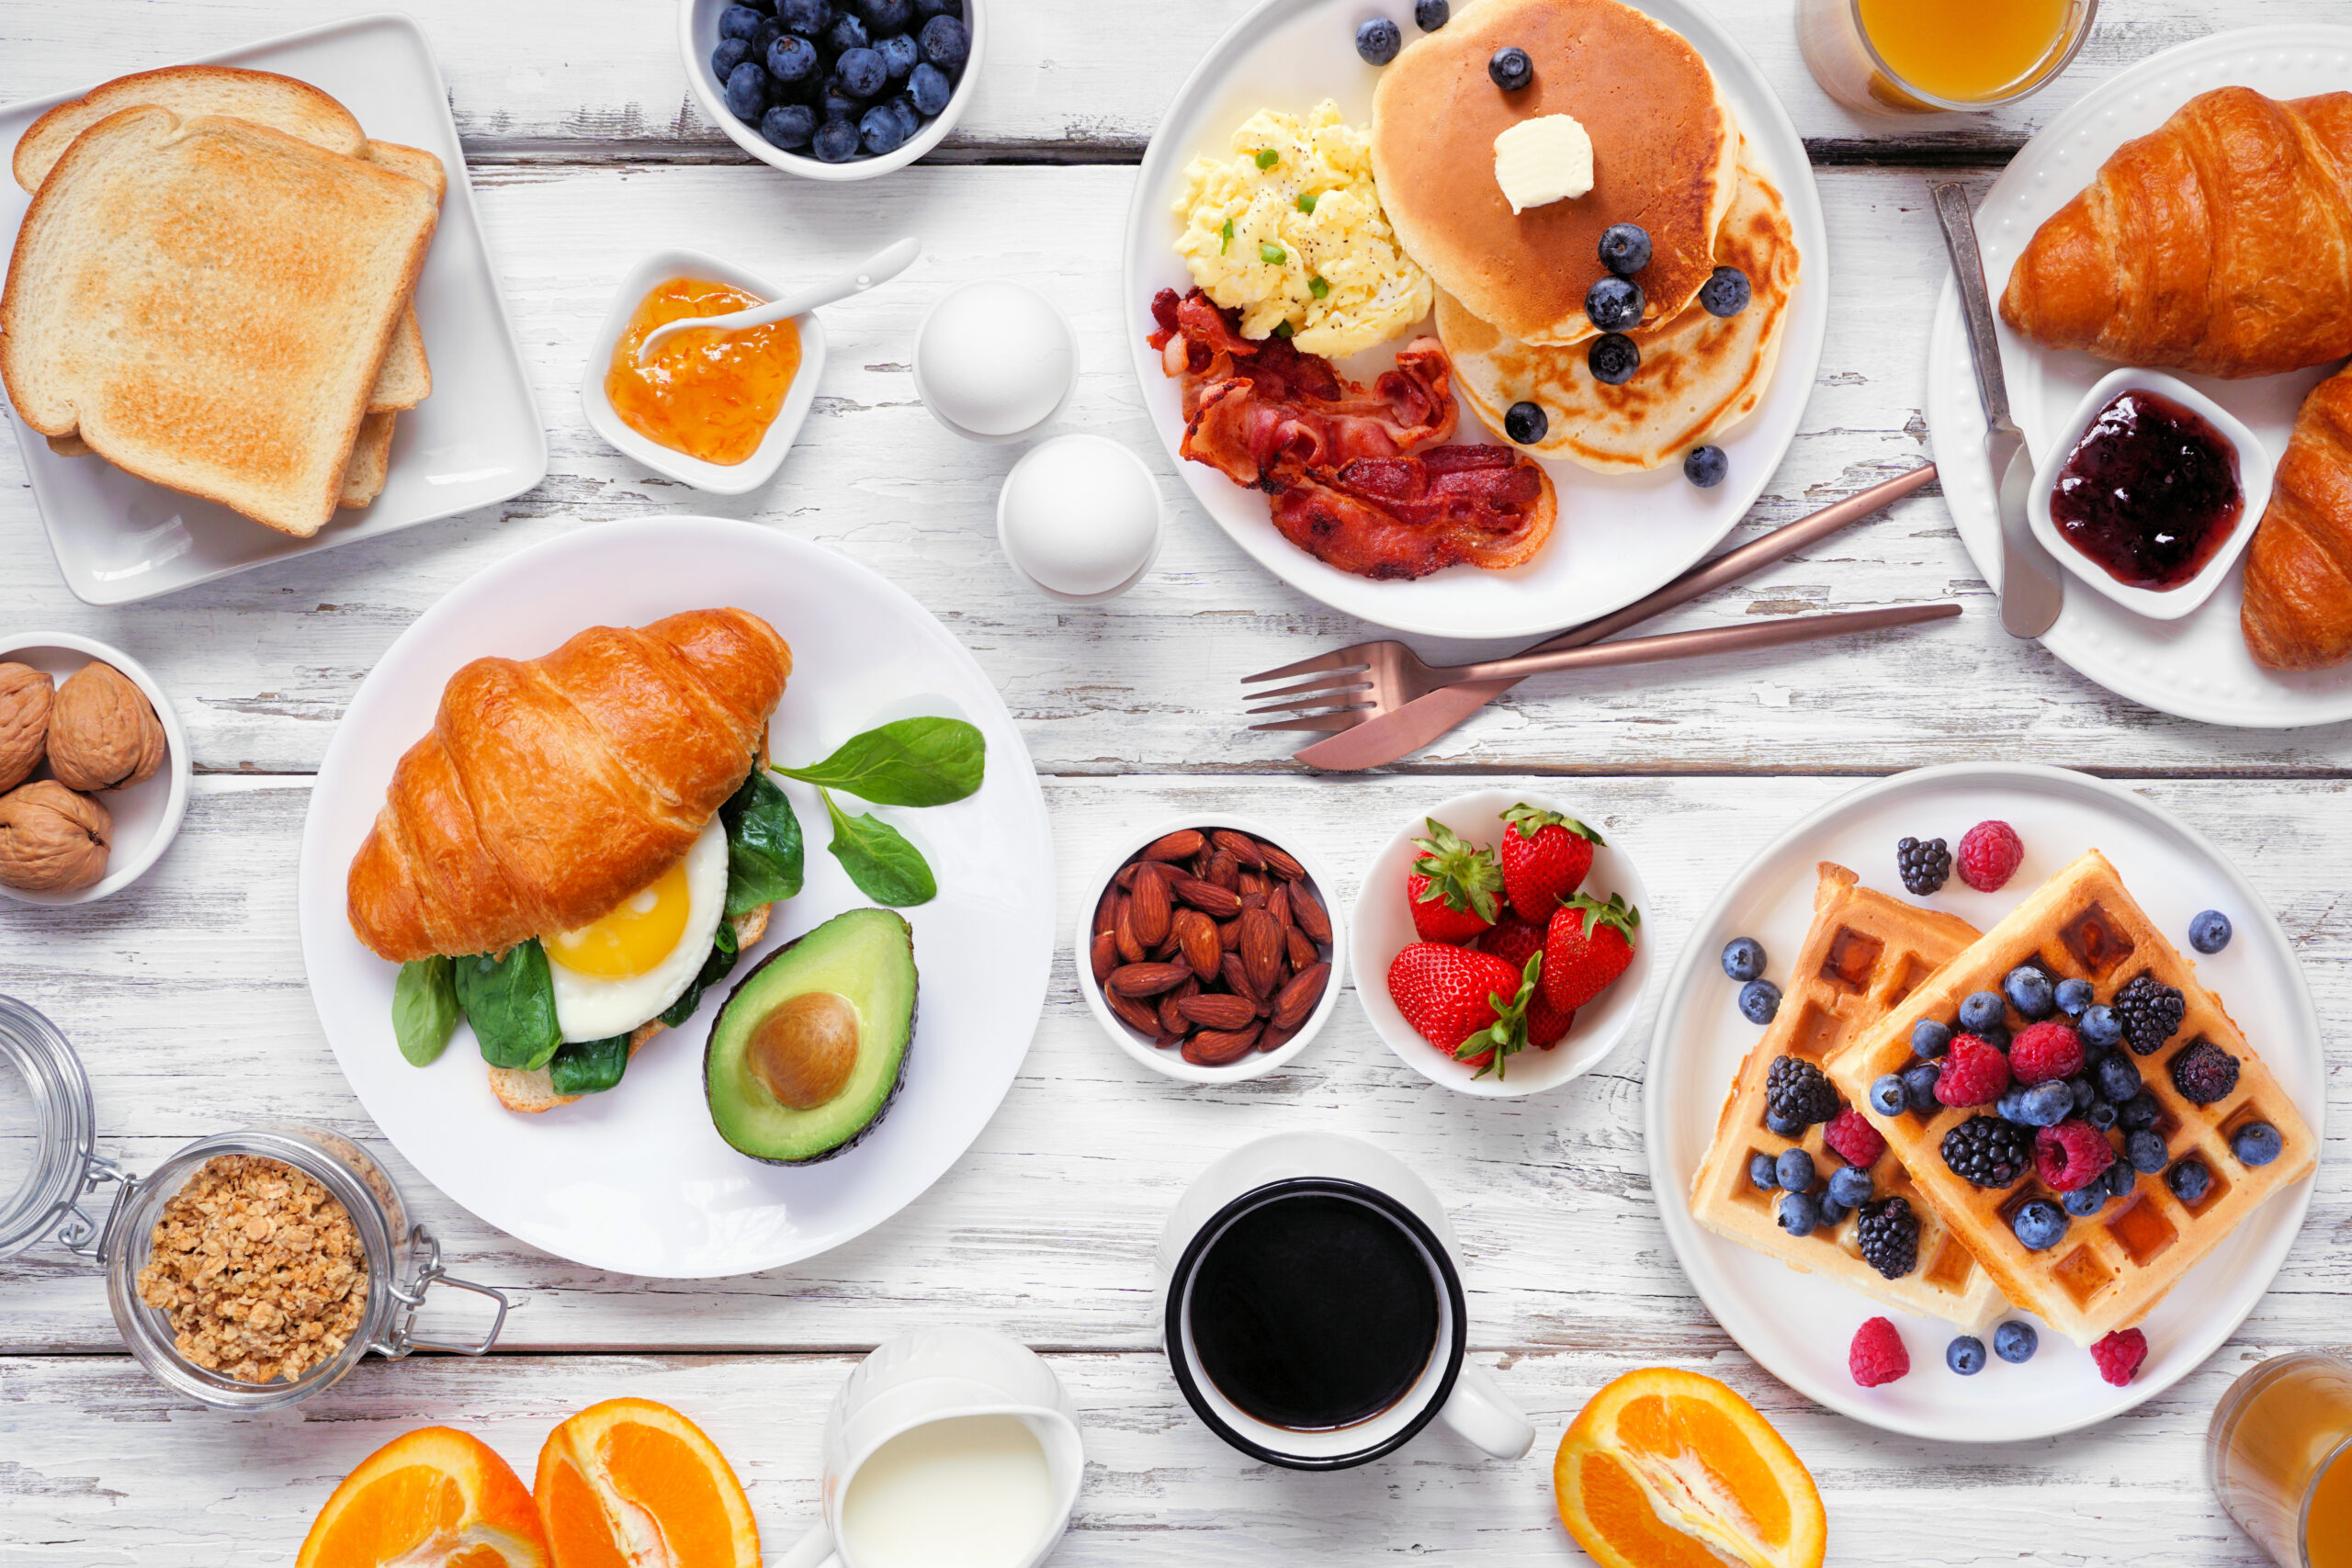 Breakfast or brunch table scene on a white wood background. Top view. Selection of sweet and savory food items.